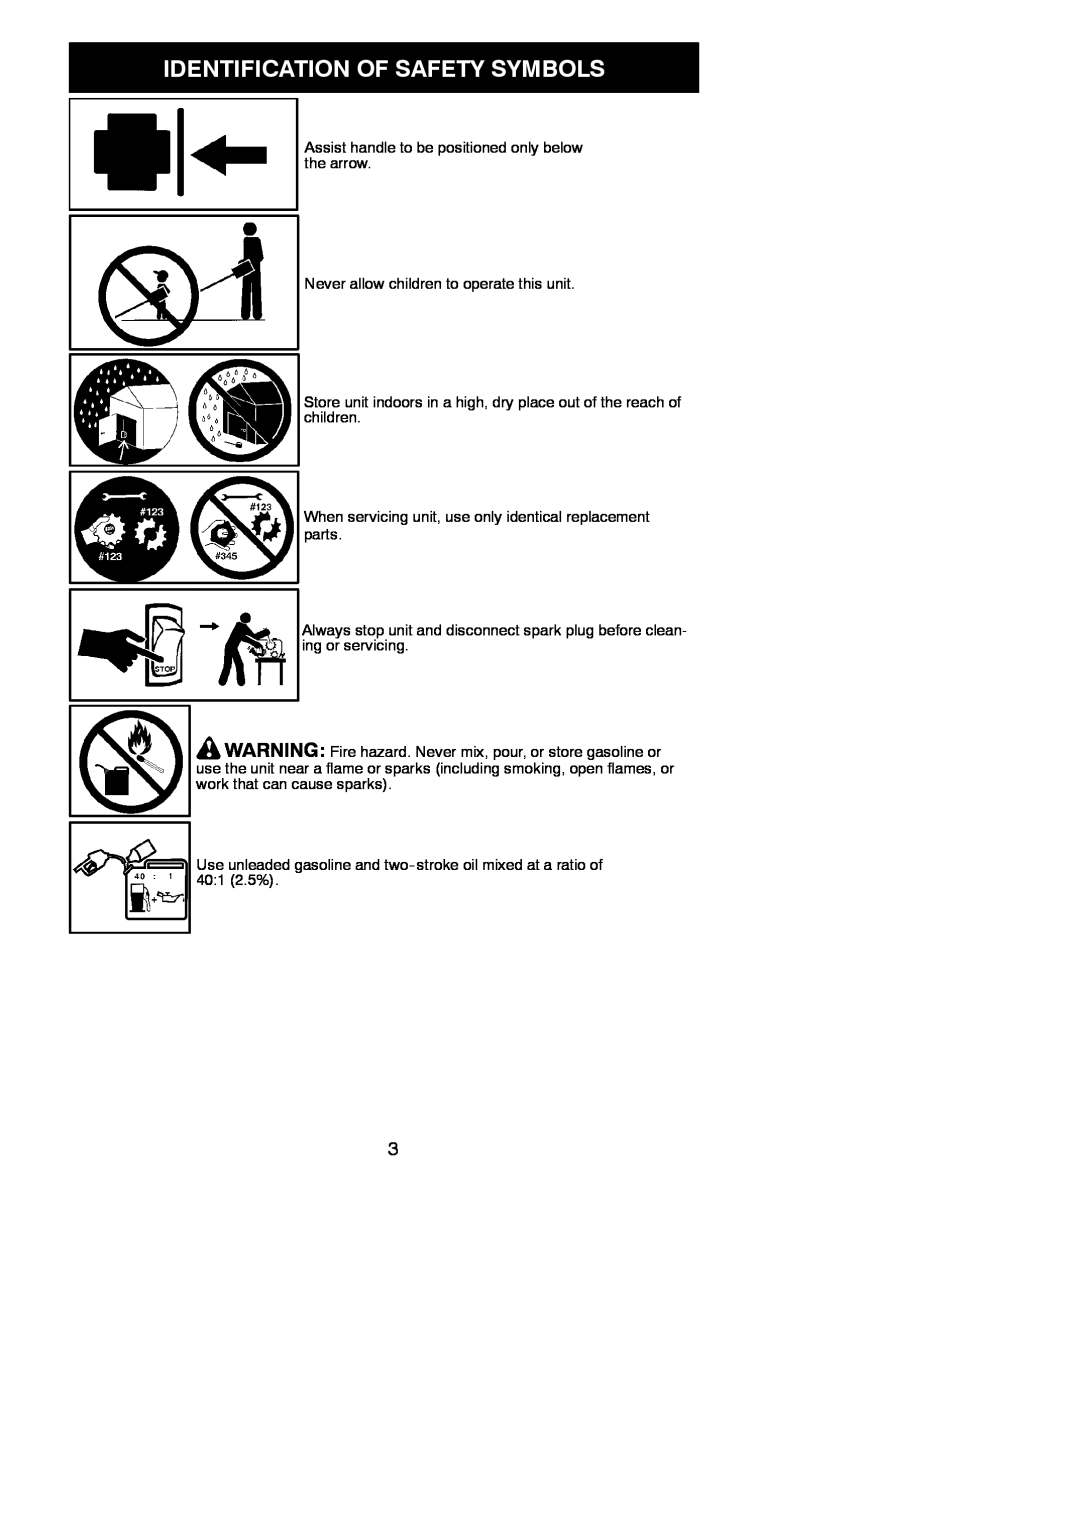 Poulan 115156126, PP330 Identification Of Safety Symbols, Assist handle to be positioned only below the arrow 